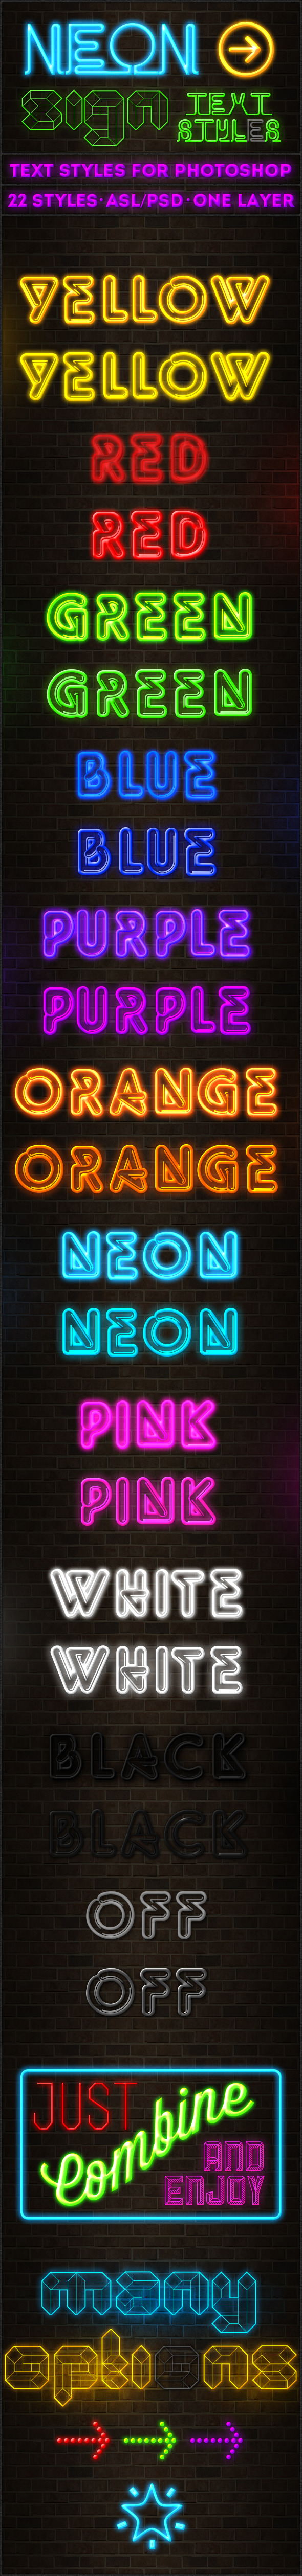 Neon Sign - Text Styles